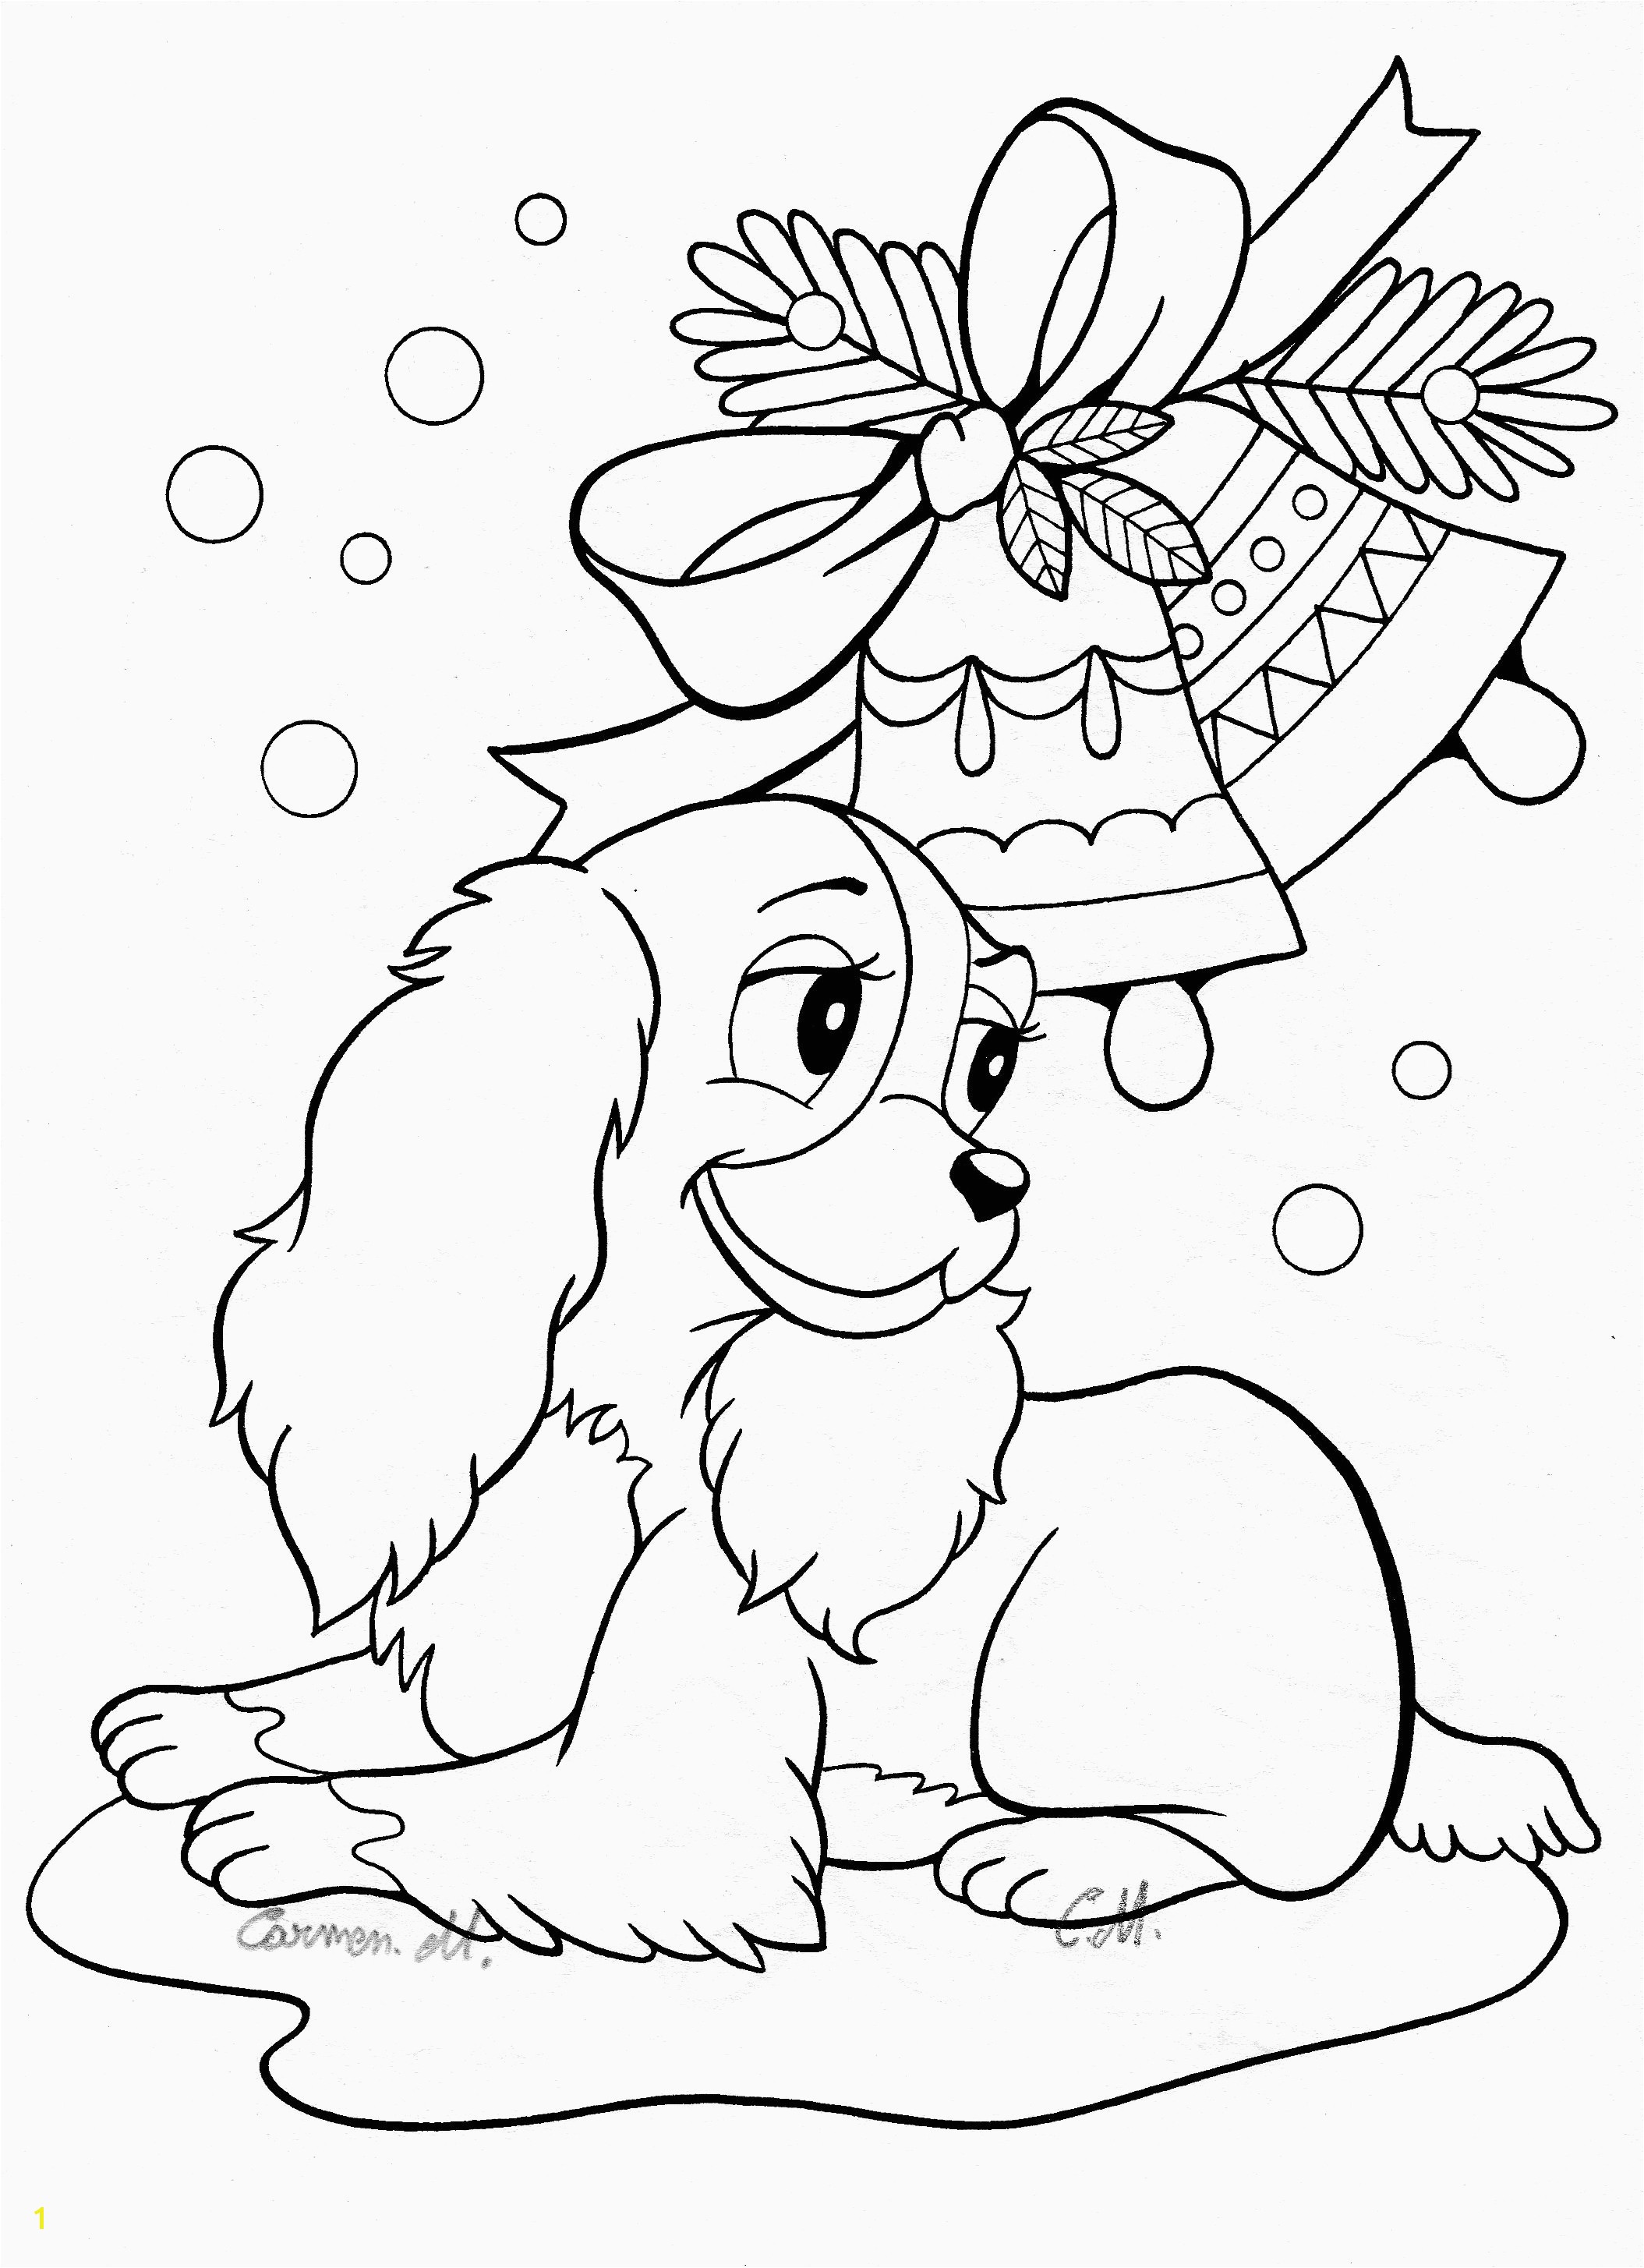 Cute Coloring Pages Of Animals Cute Coloring Pages for Kids Coloring Pages